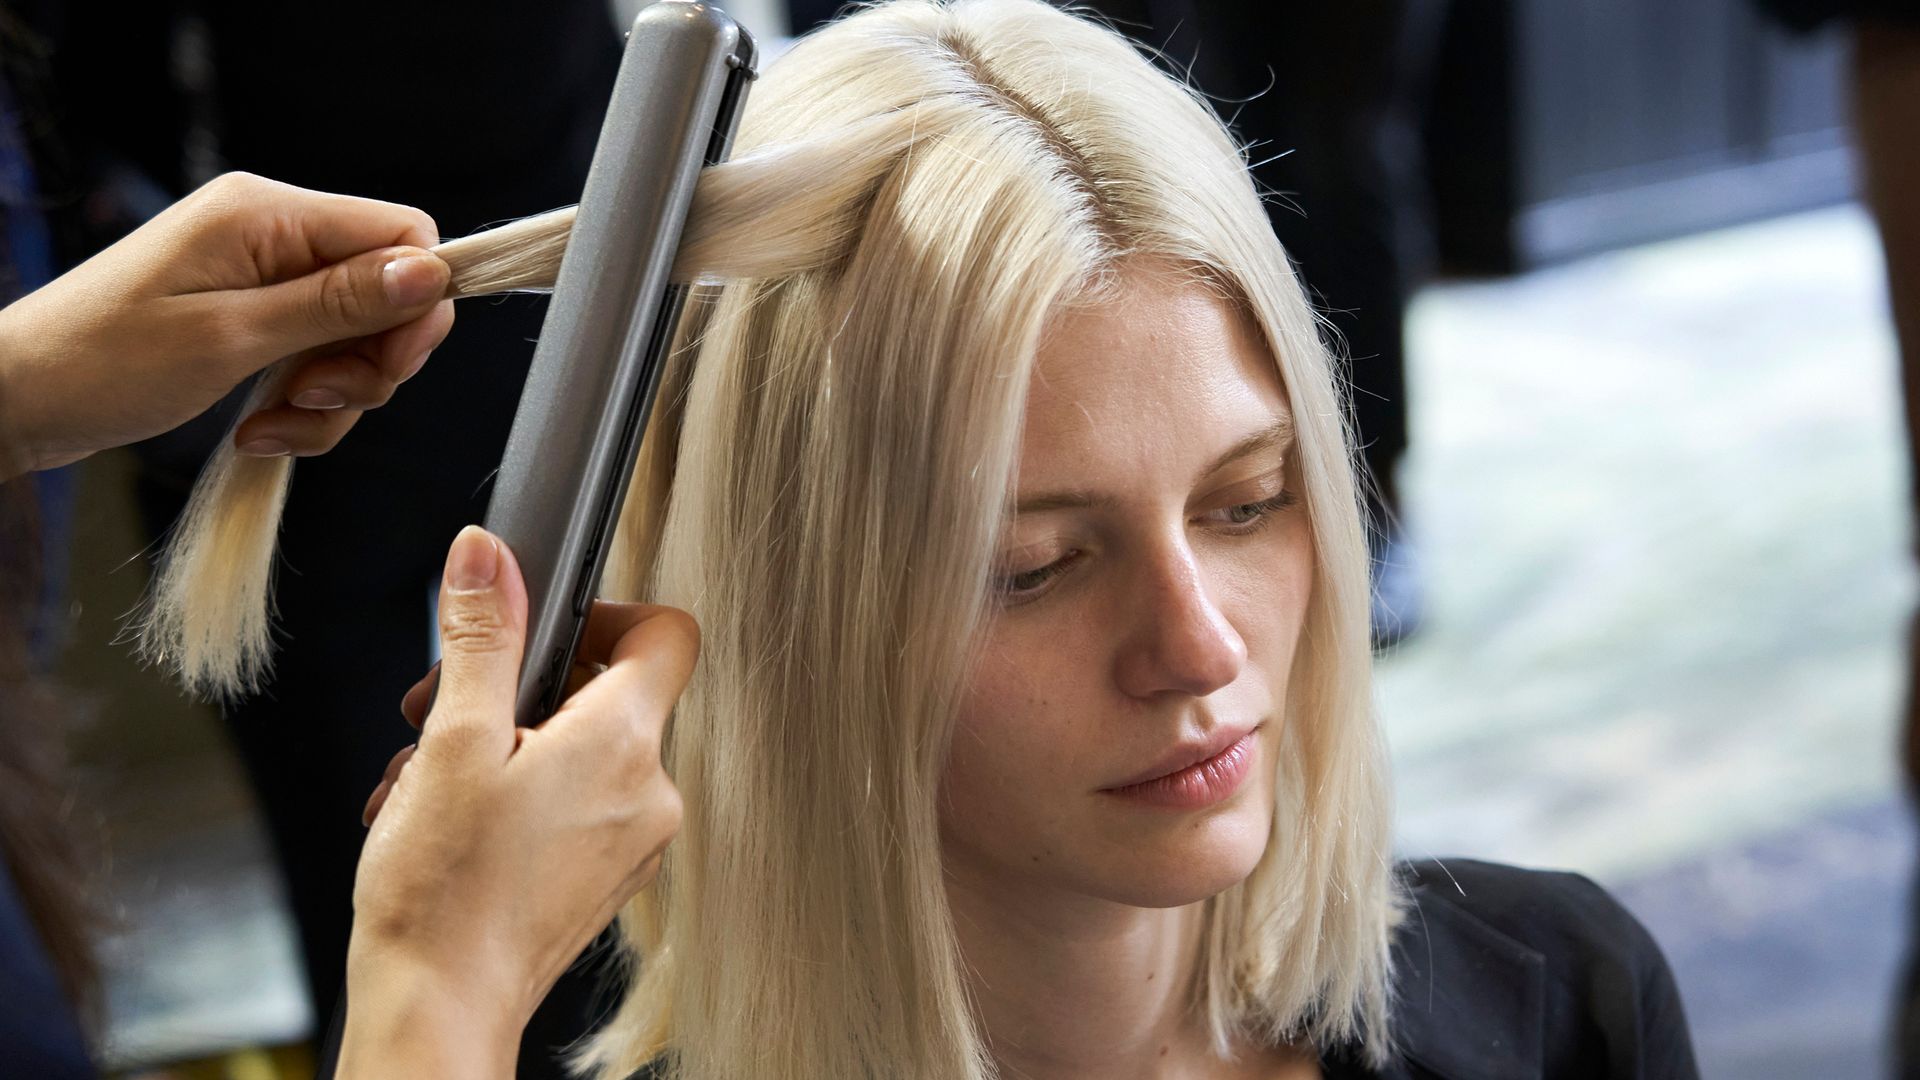 7 best hair straighteners for every hair type & budget: Fine to thick hair, damaged & more